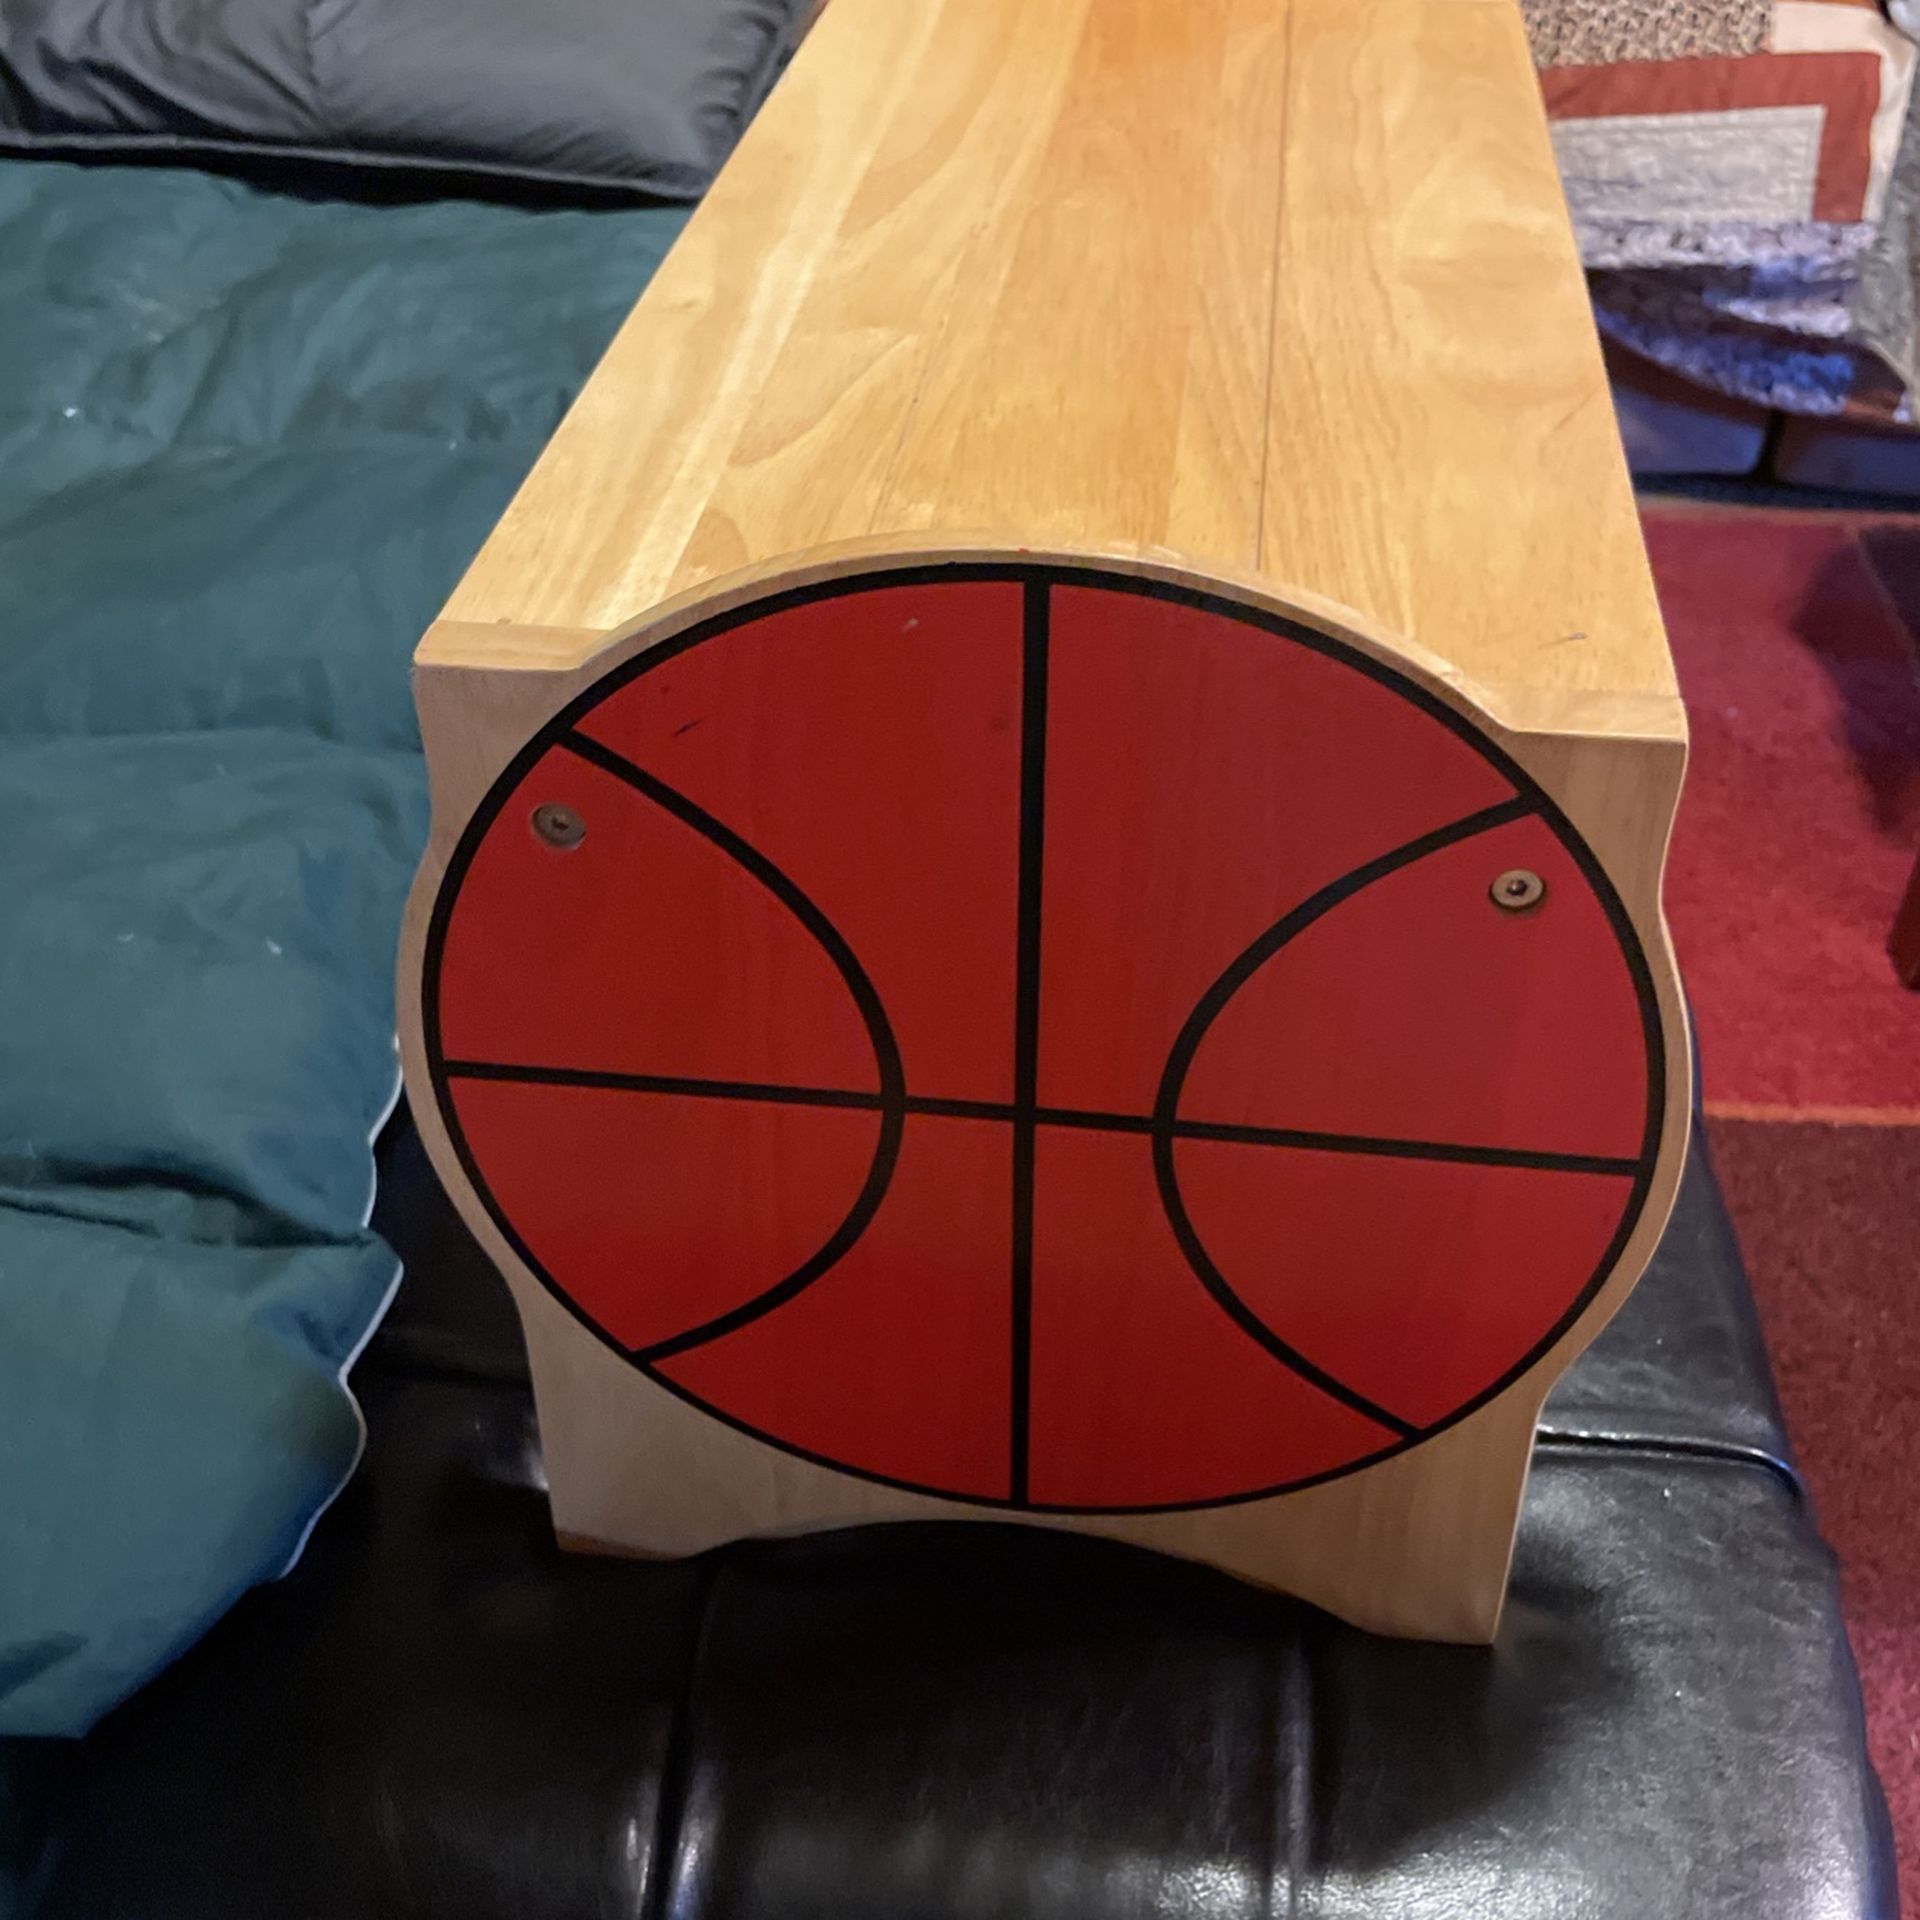 2 Wooden Basketball Stools / Solid Wood